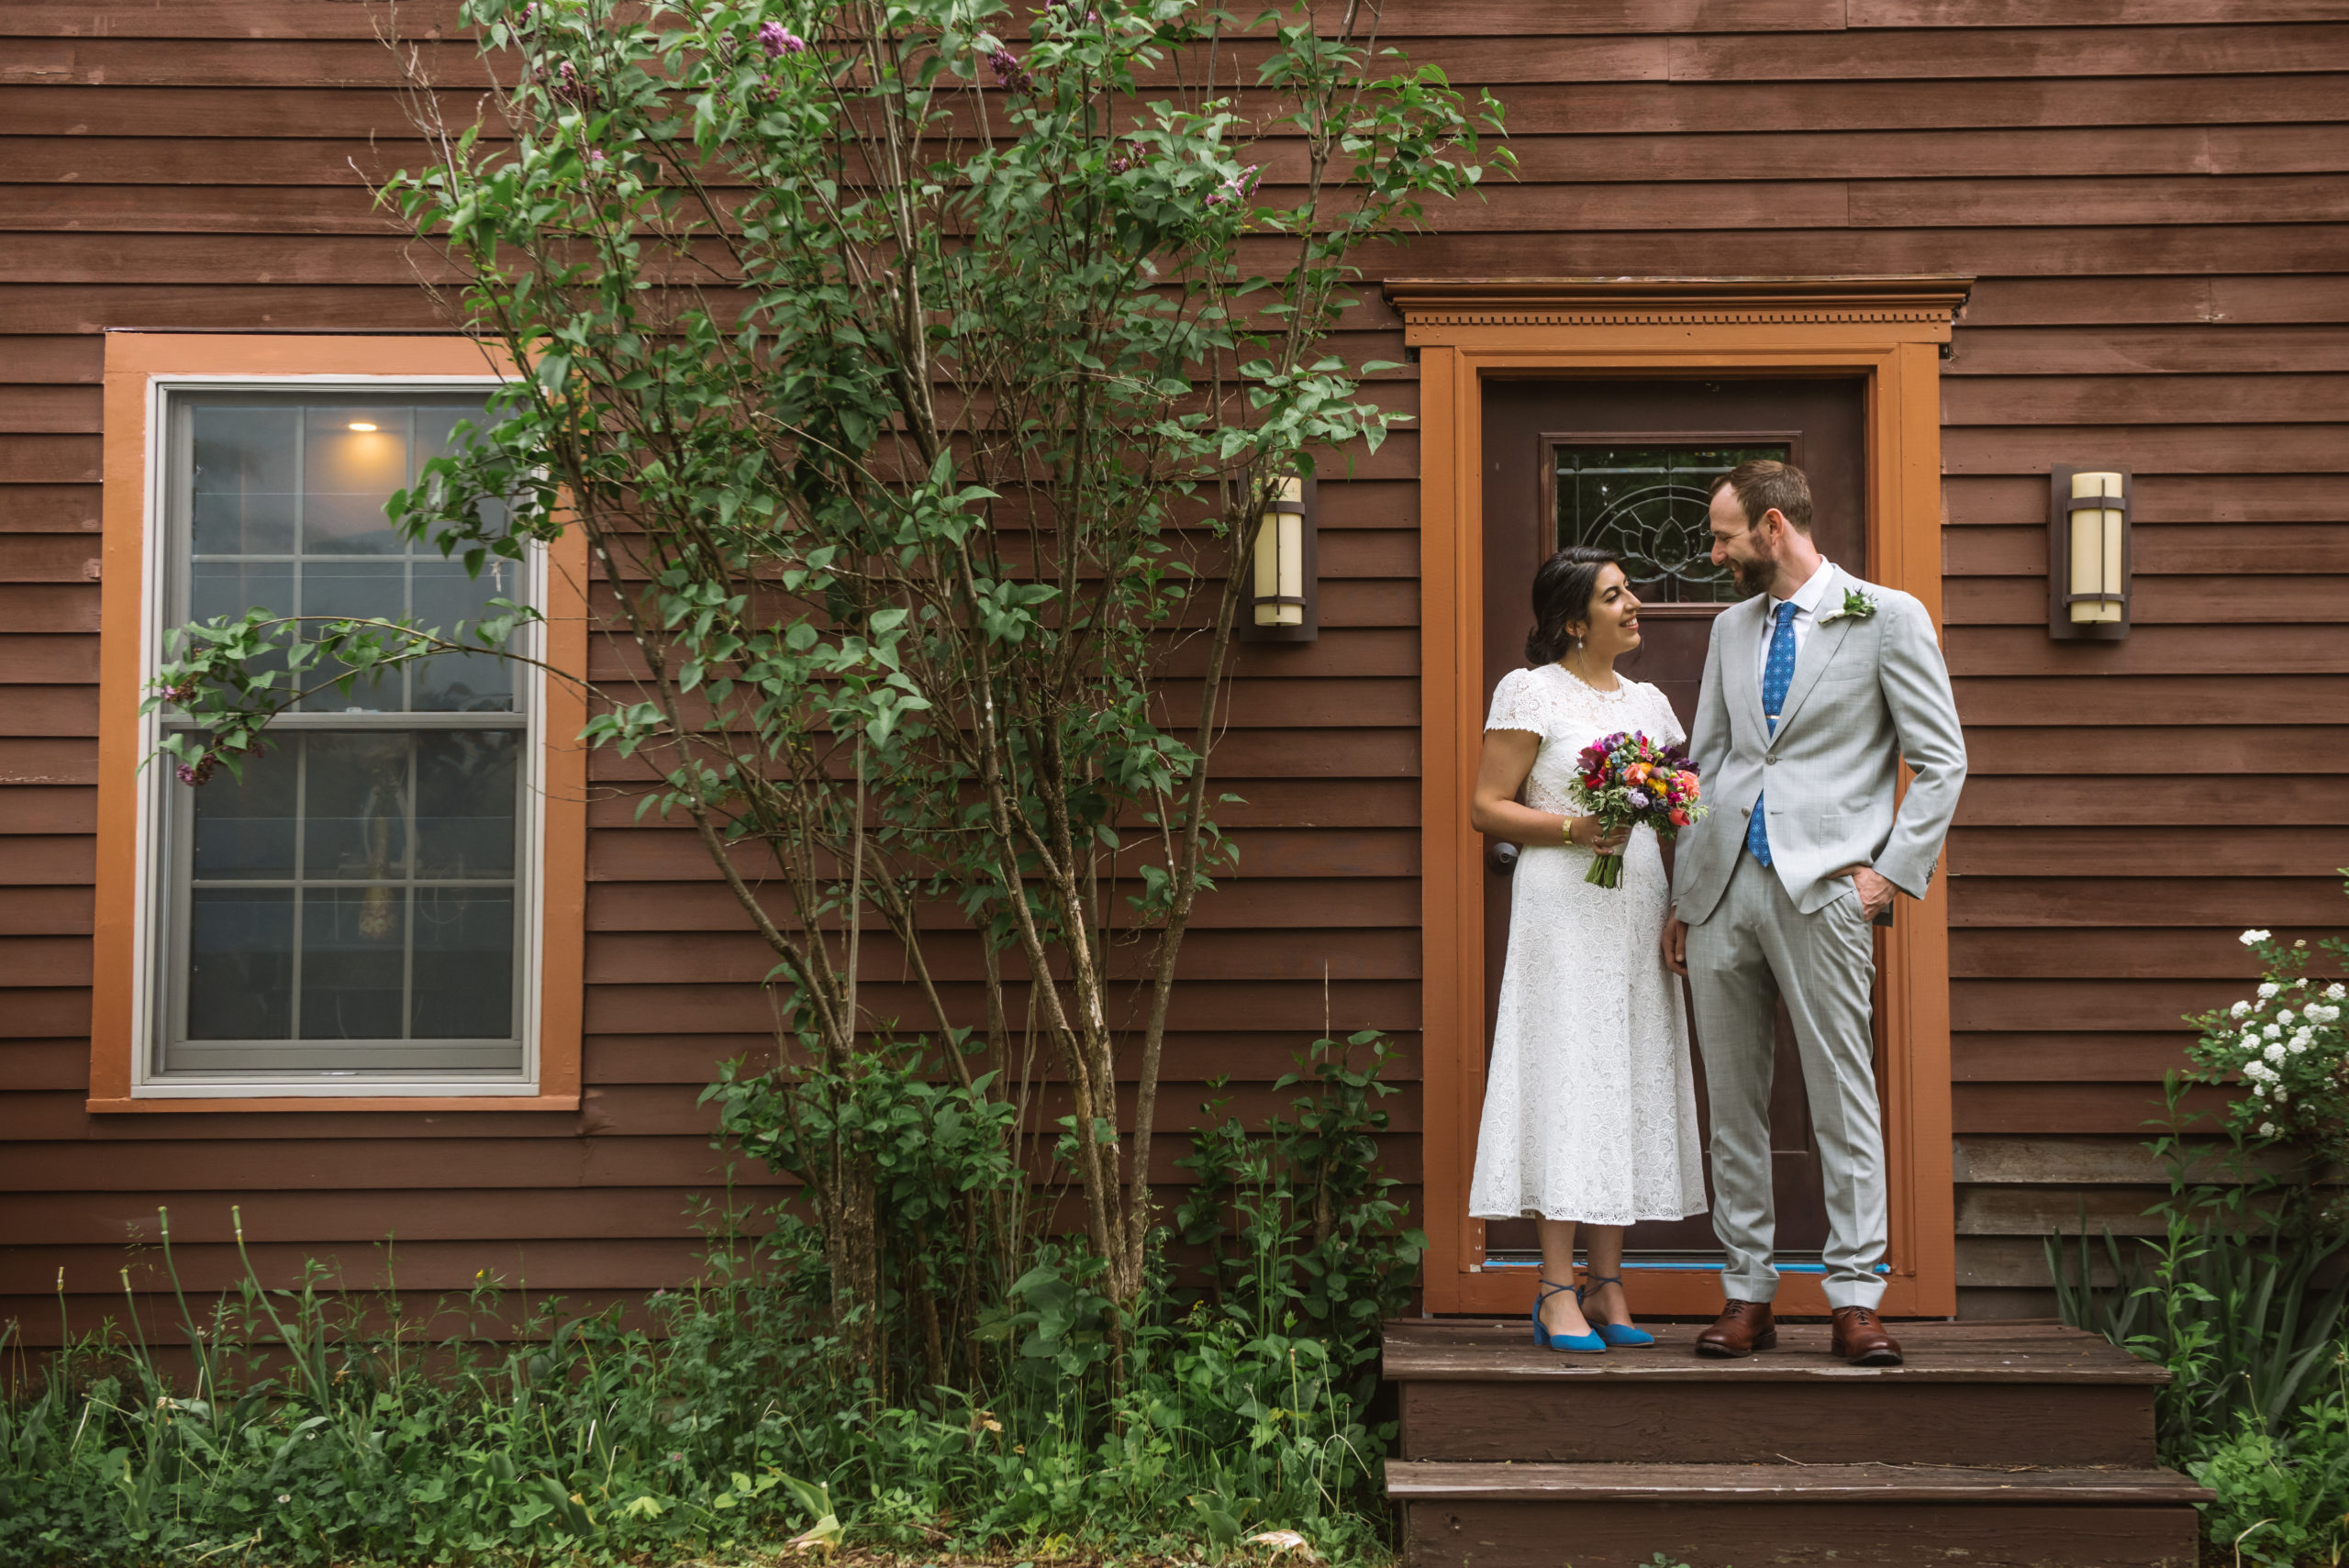 Bride and groom standing side by side, facing one another. They are both smiling. The bride is holding her bouquet in her right hand and the groom has his right hand relaxed at his side with his left hand in his pocket. They are standing in front of a dark red wood house's front door with greenery and trees surrounding the facade.